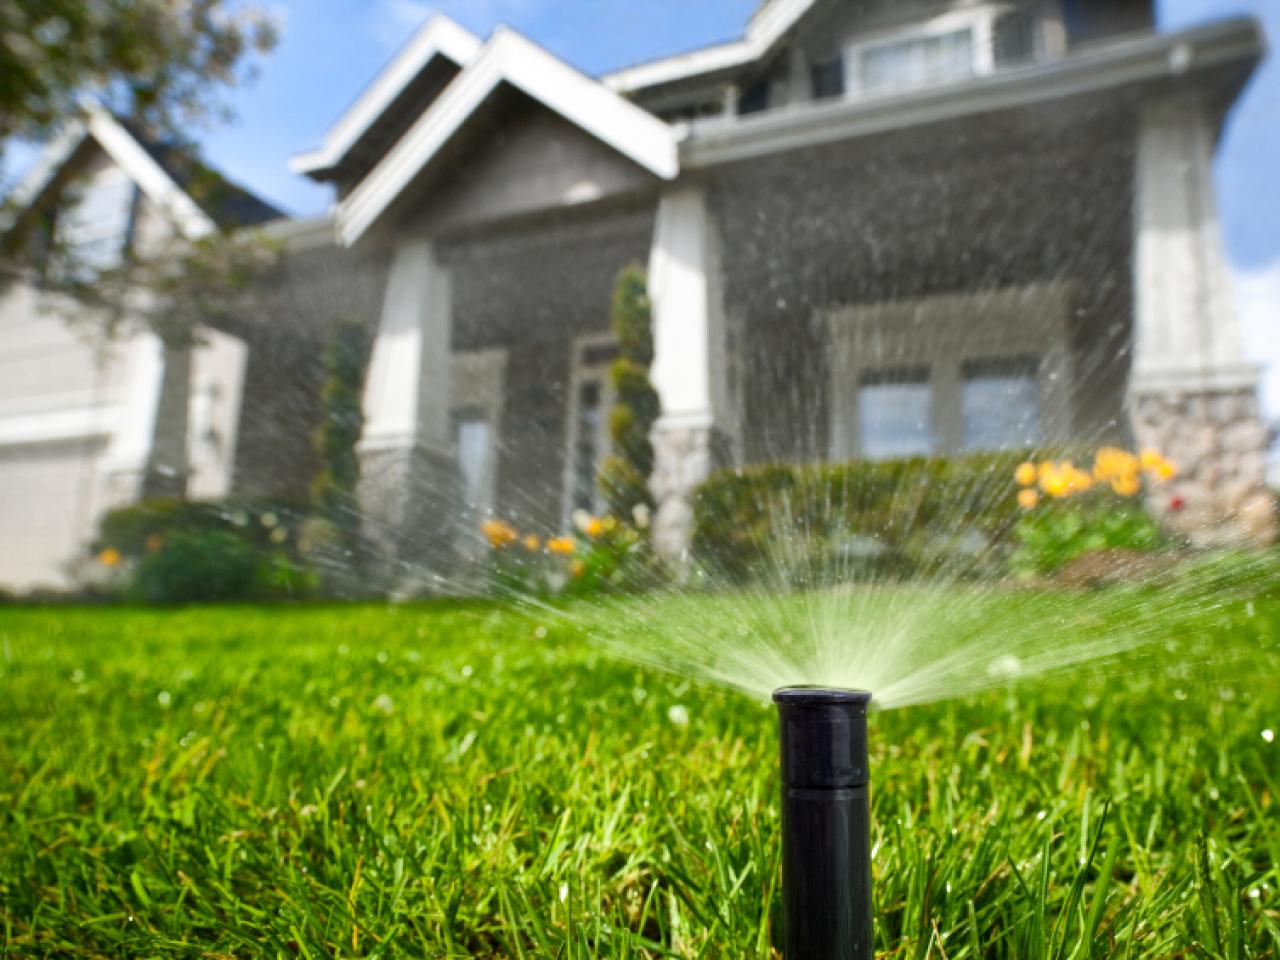  Irrigation Design in Texas Maximizing Water Efficiency for Optimal Landscapes